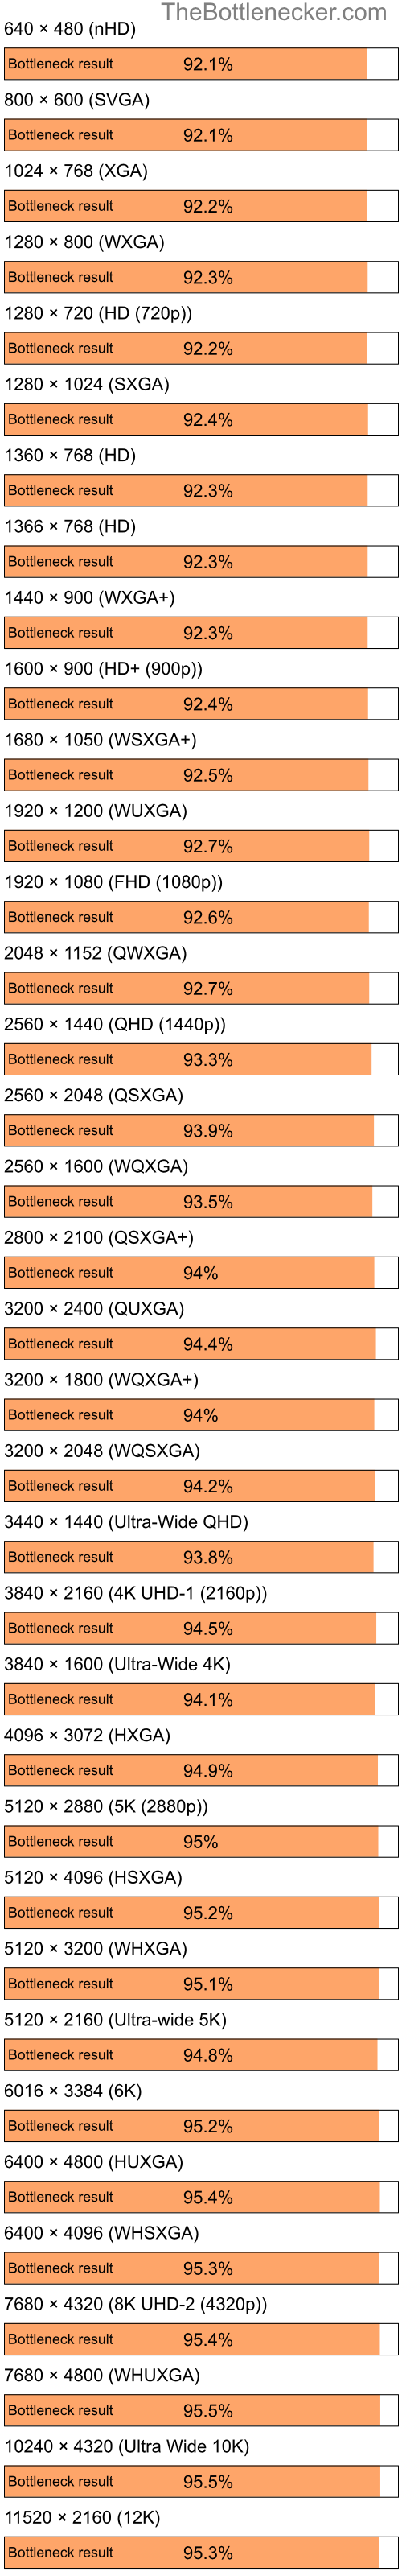 Bottleneck results by resolution for Intel Celeron and NVIDIA GeForce2 GTS in Graphic Card Intense Tasks